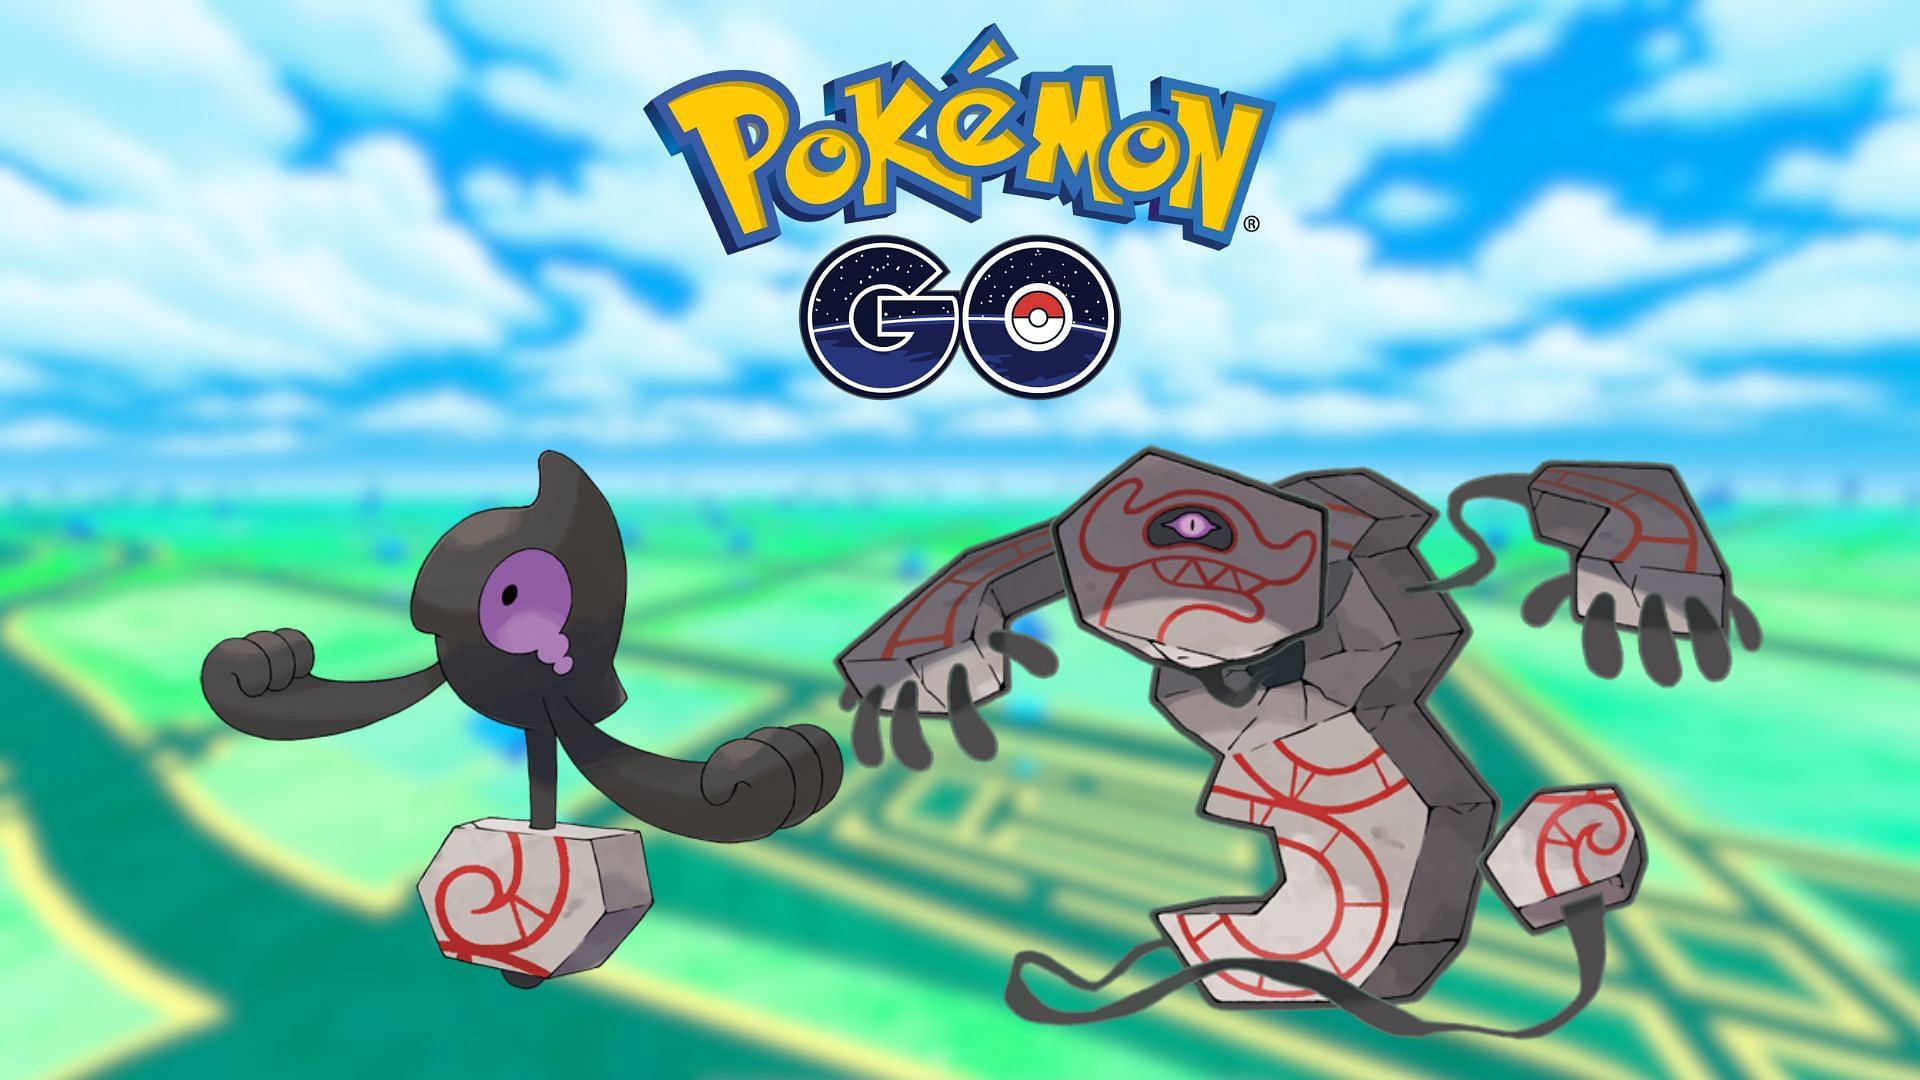 Pokemon GO: How to evolve Galarian Yamask into Runerigus?